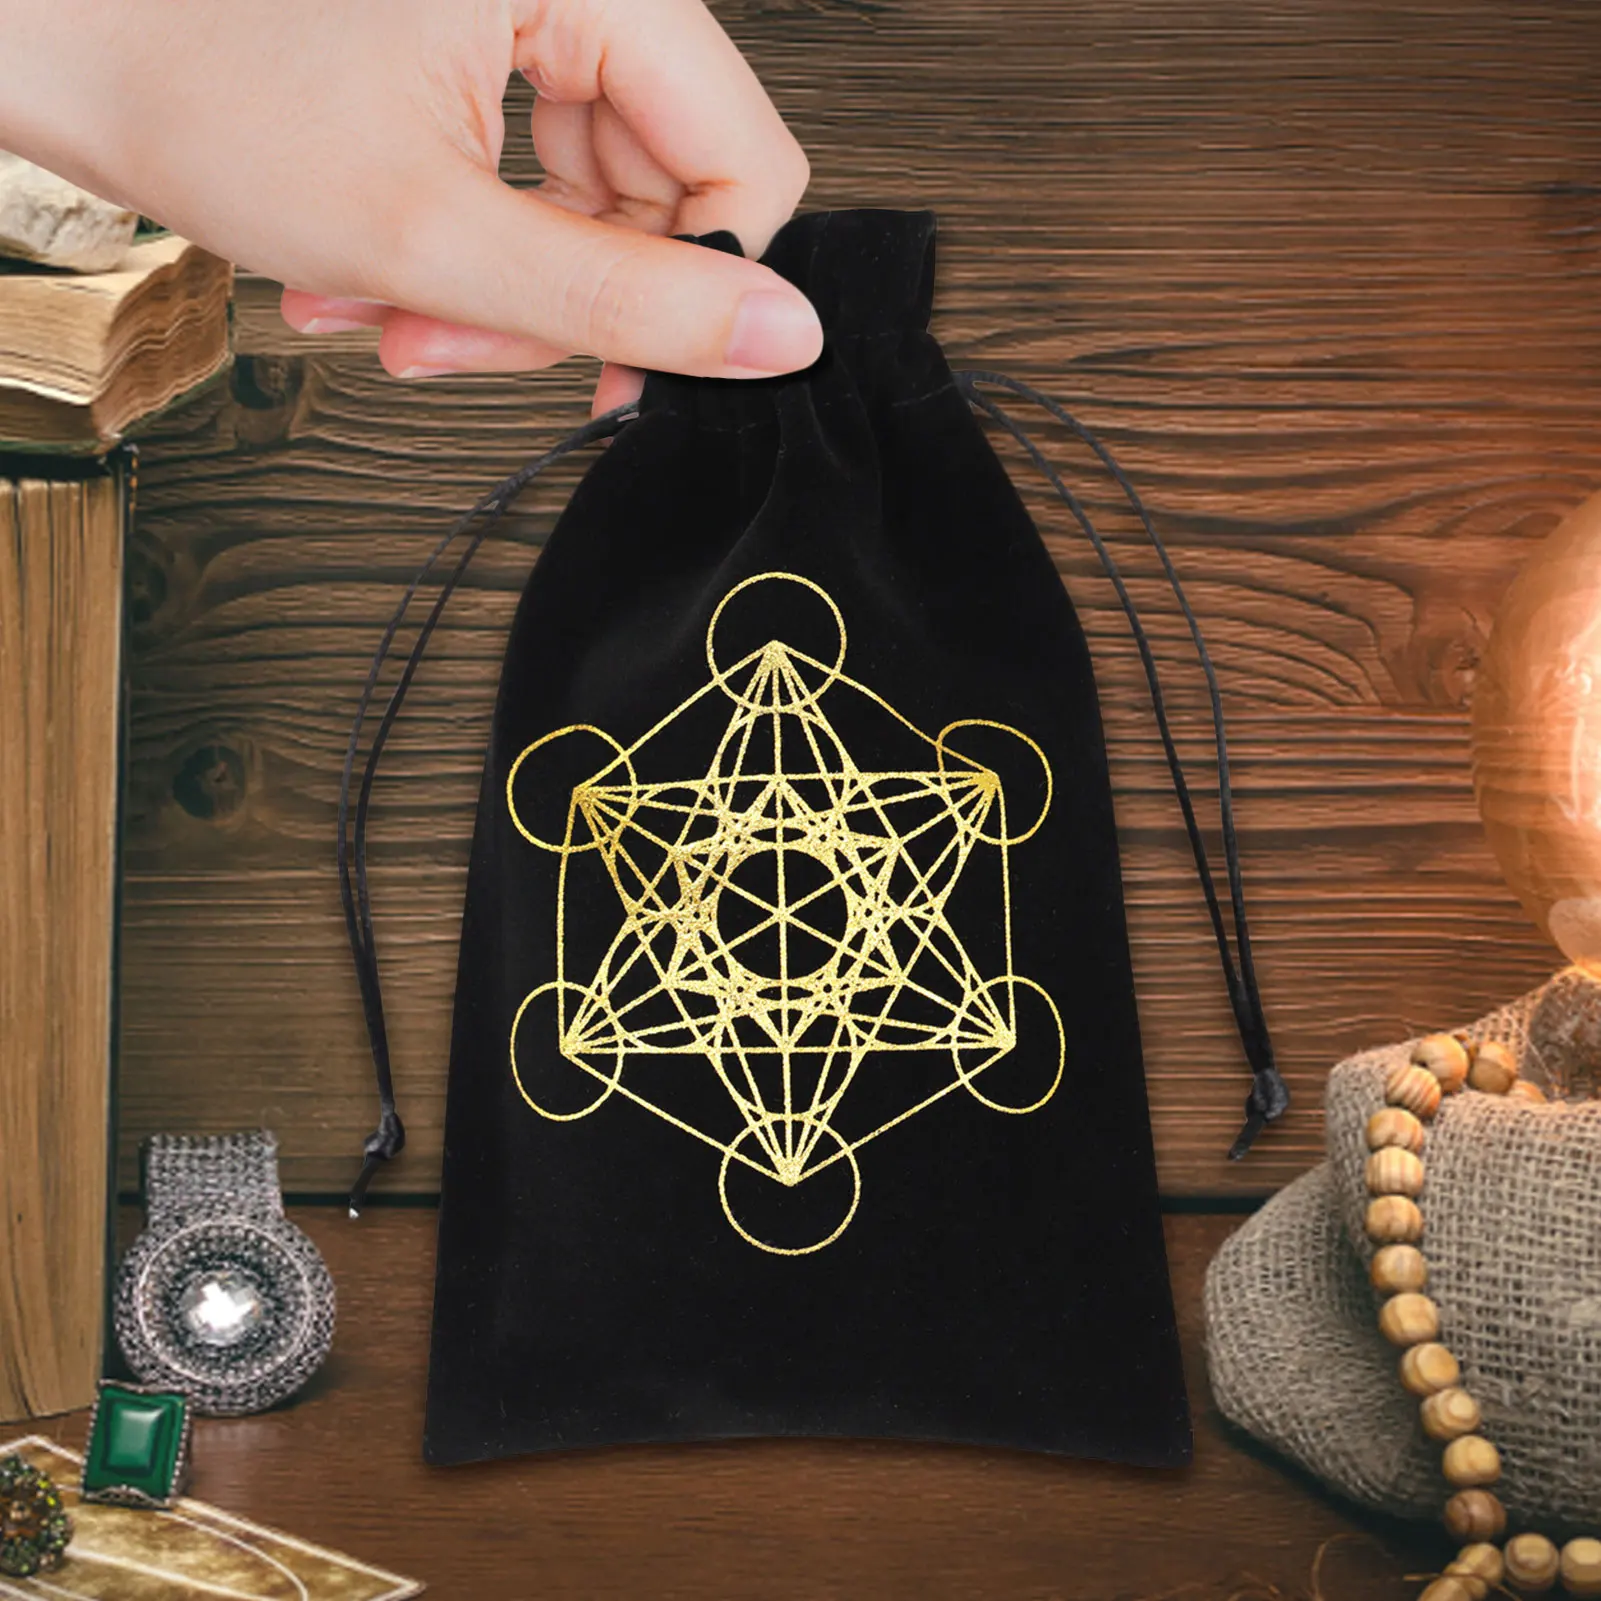 Jewelry Bags Pouch for Tarot Rune Crystal Dice Tarot Card Holder Jewelry Bags with Drawstring Novel Tarot Card & Dice Storage Bag Tarot Card Bag 